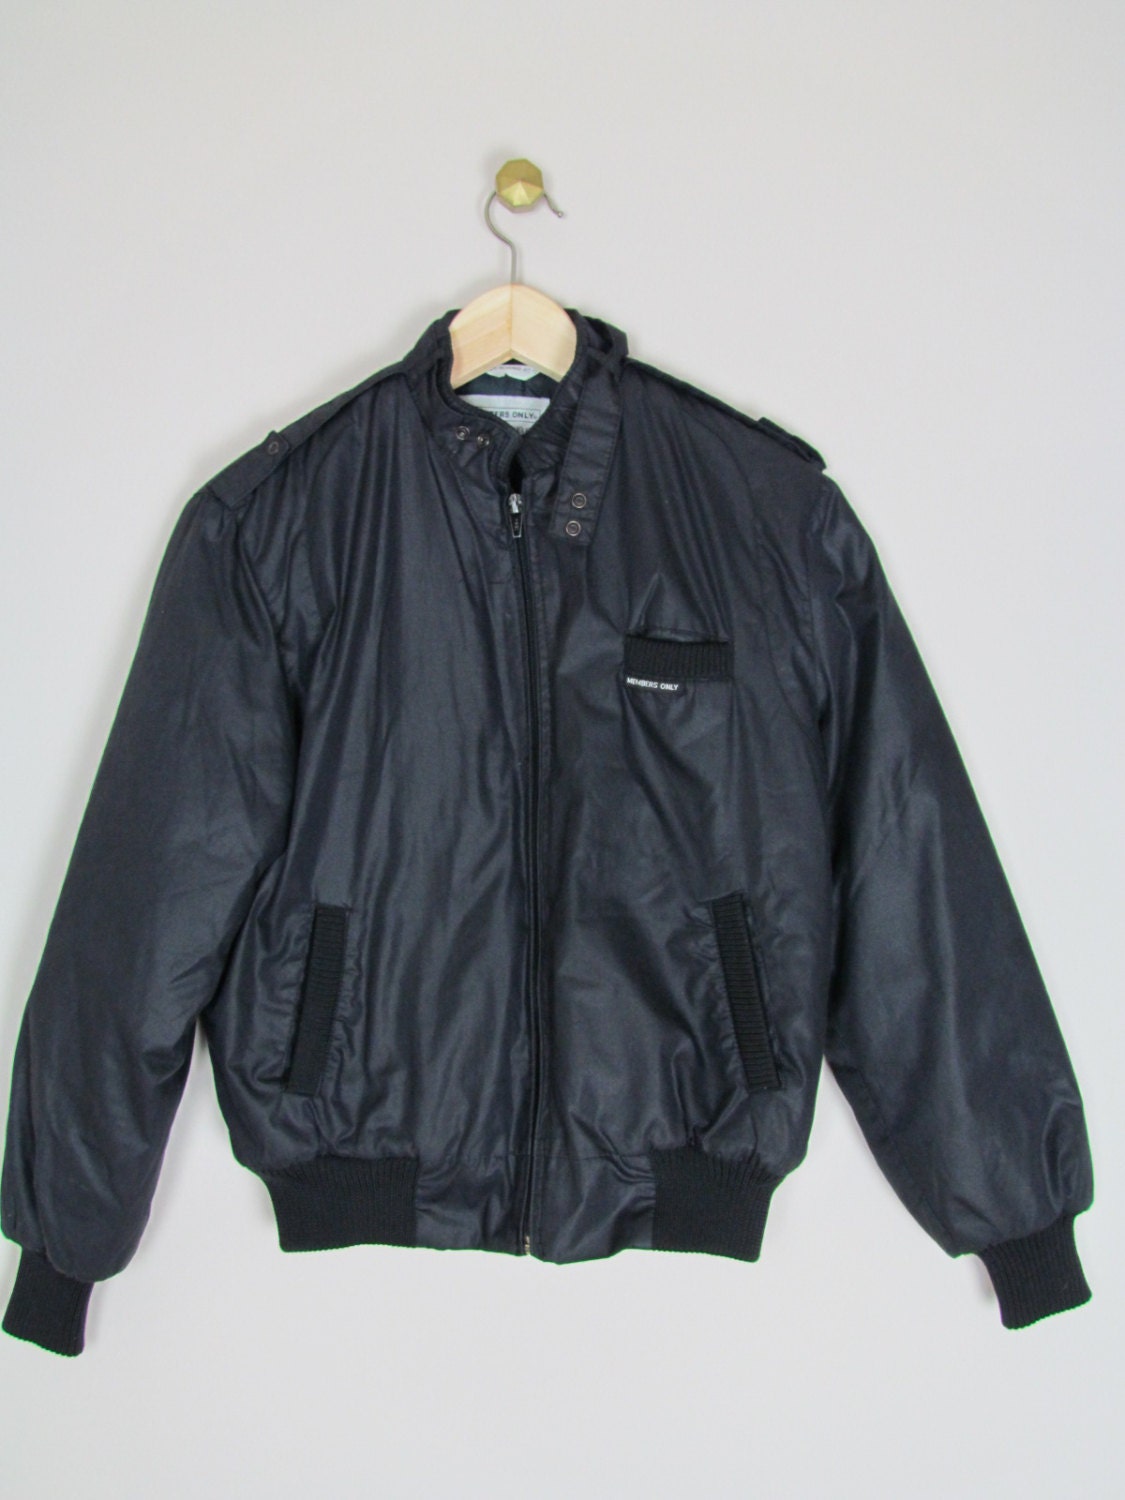 members only jacket / 1980s vintage / zip front / by shopbambam